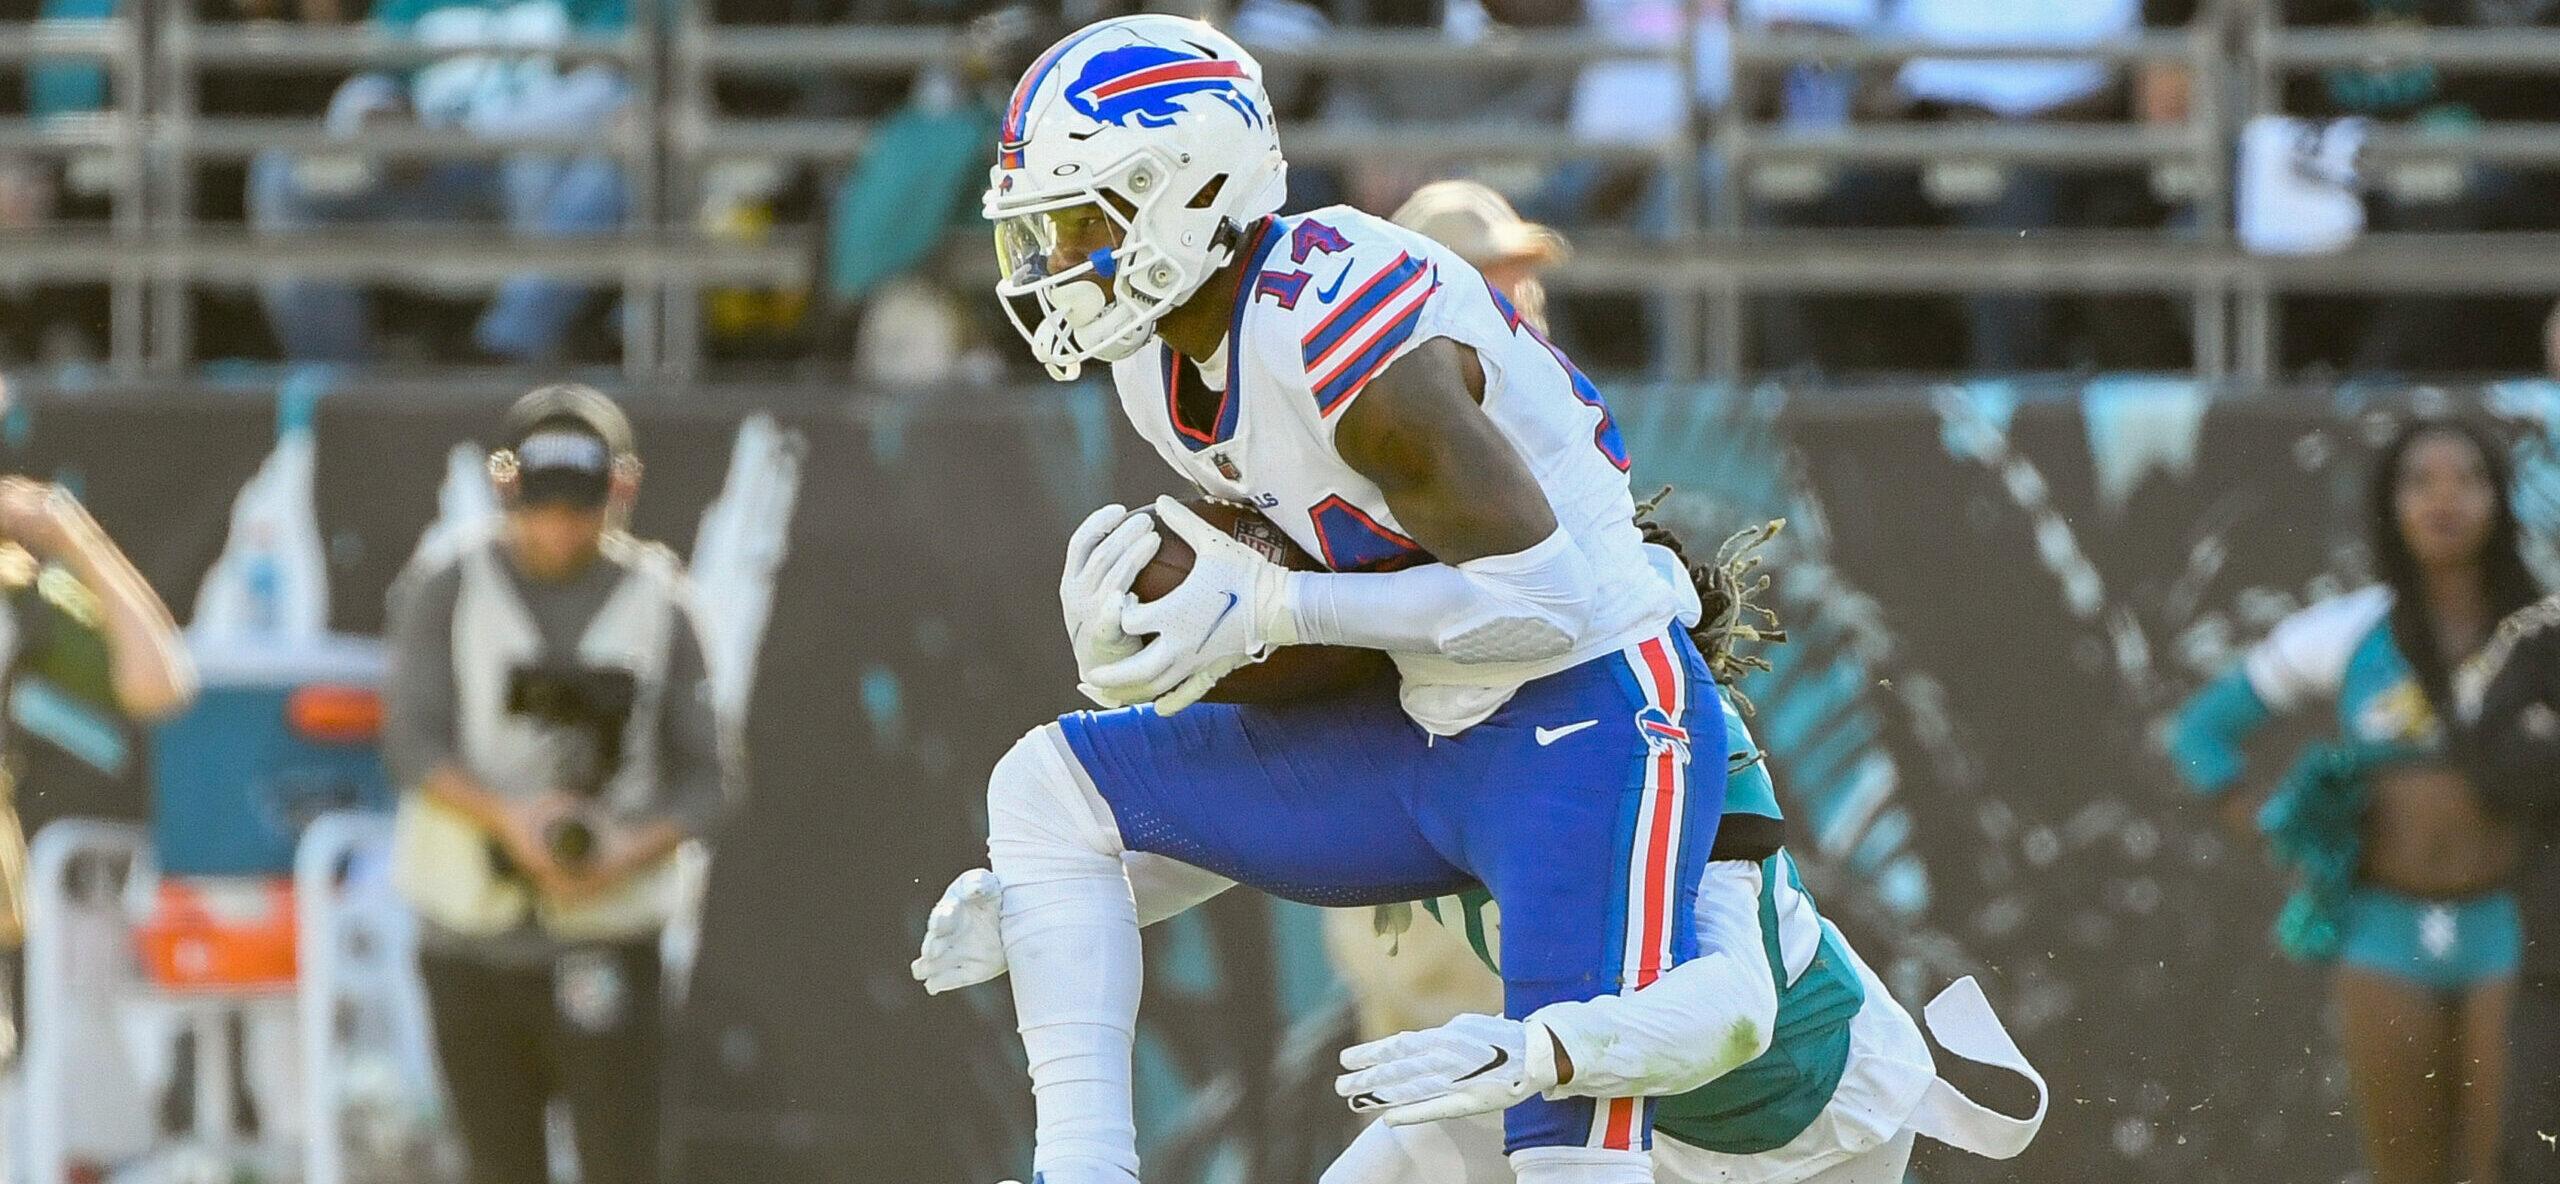 Betty White Honored By 'Buffalo Bills' Star Stefon Diggs With Custom Cleats